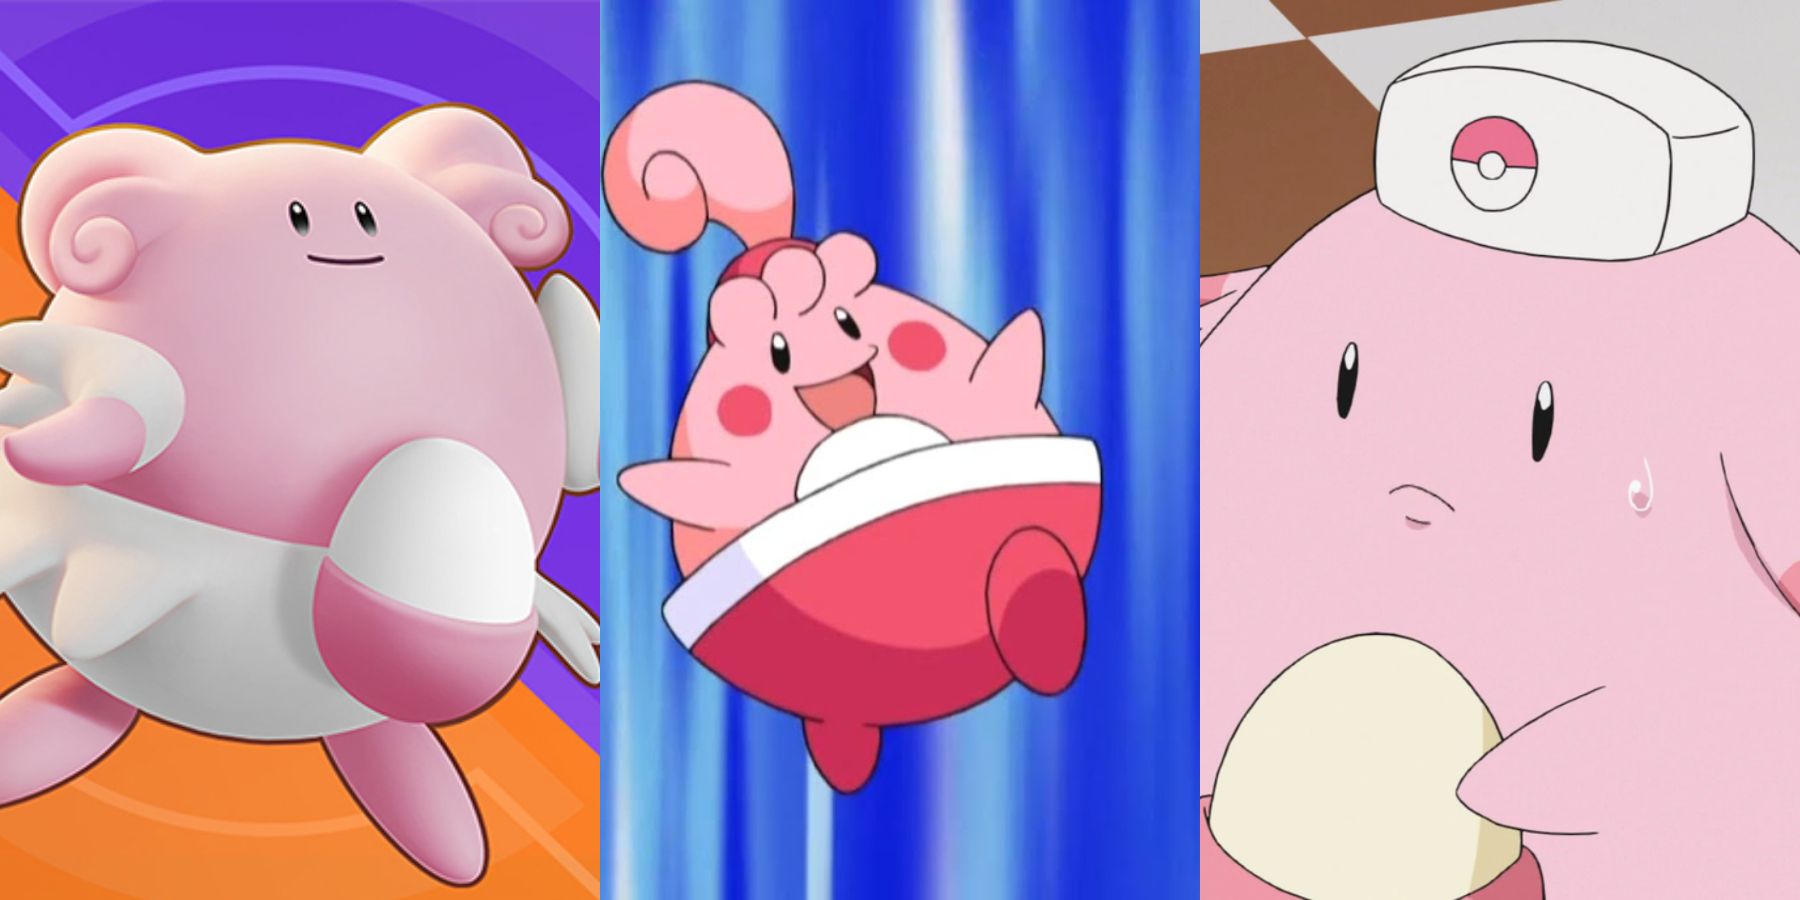 How to Evolve Chansey: 12 Steps (with Pictures) - wikiHow